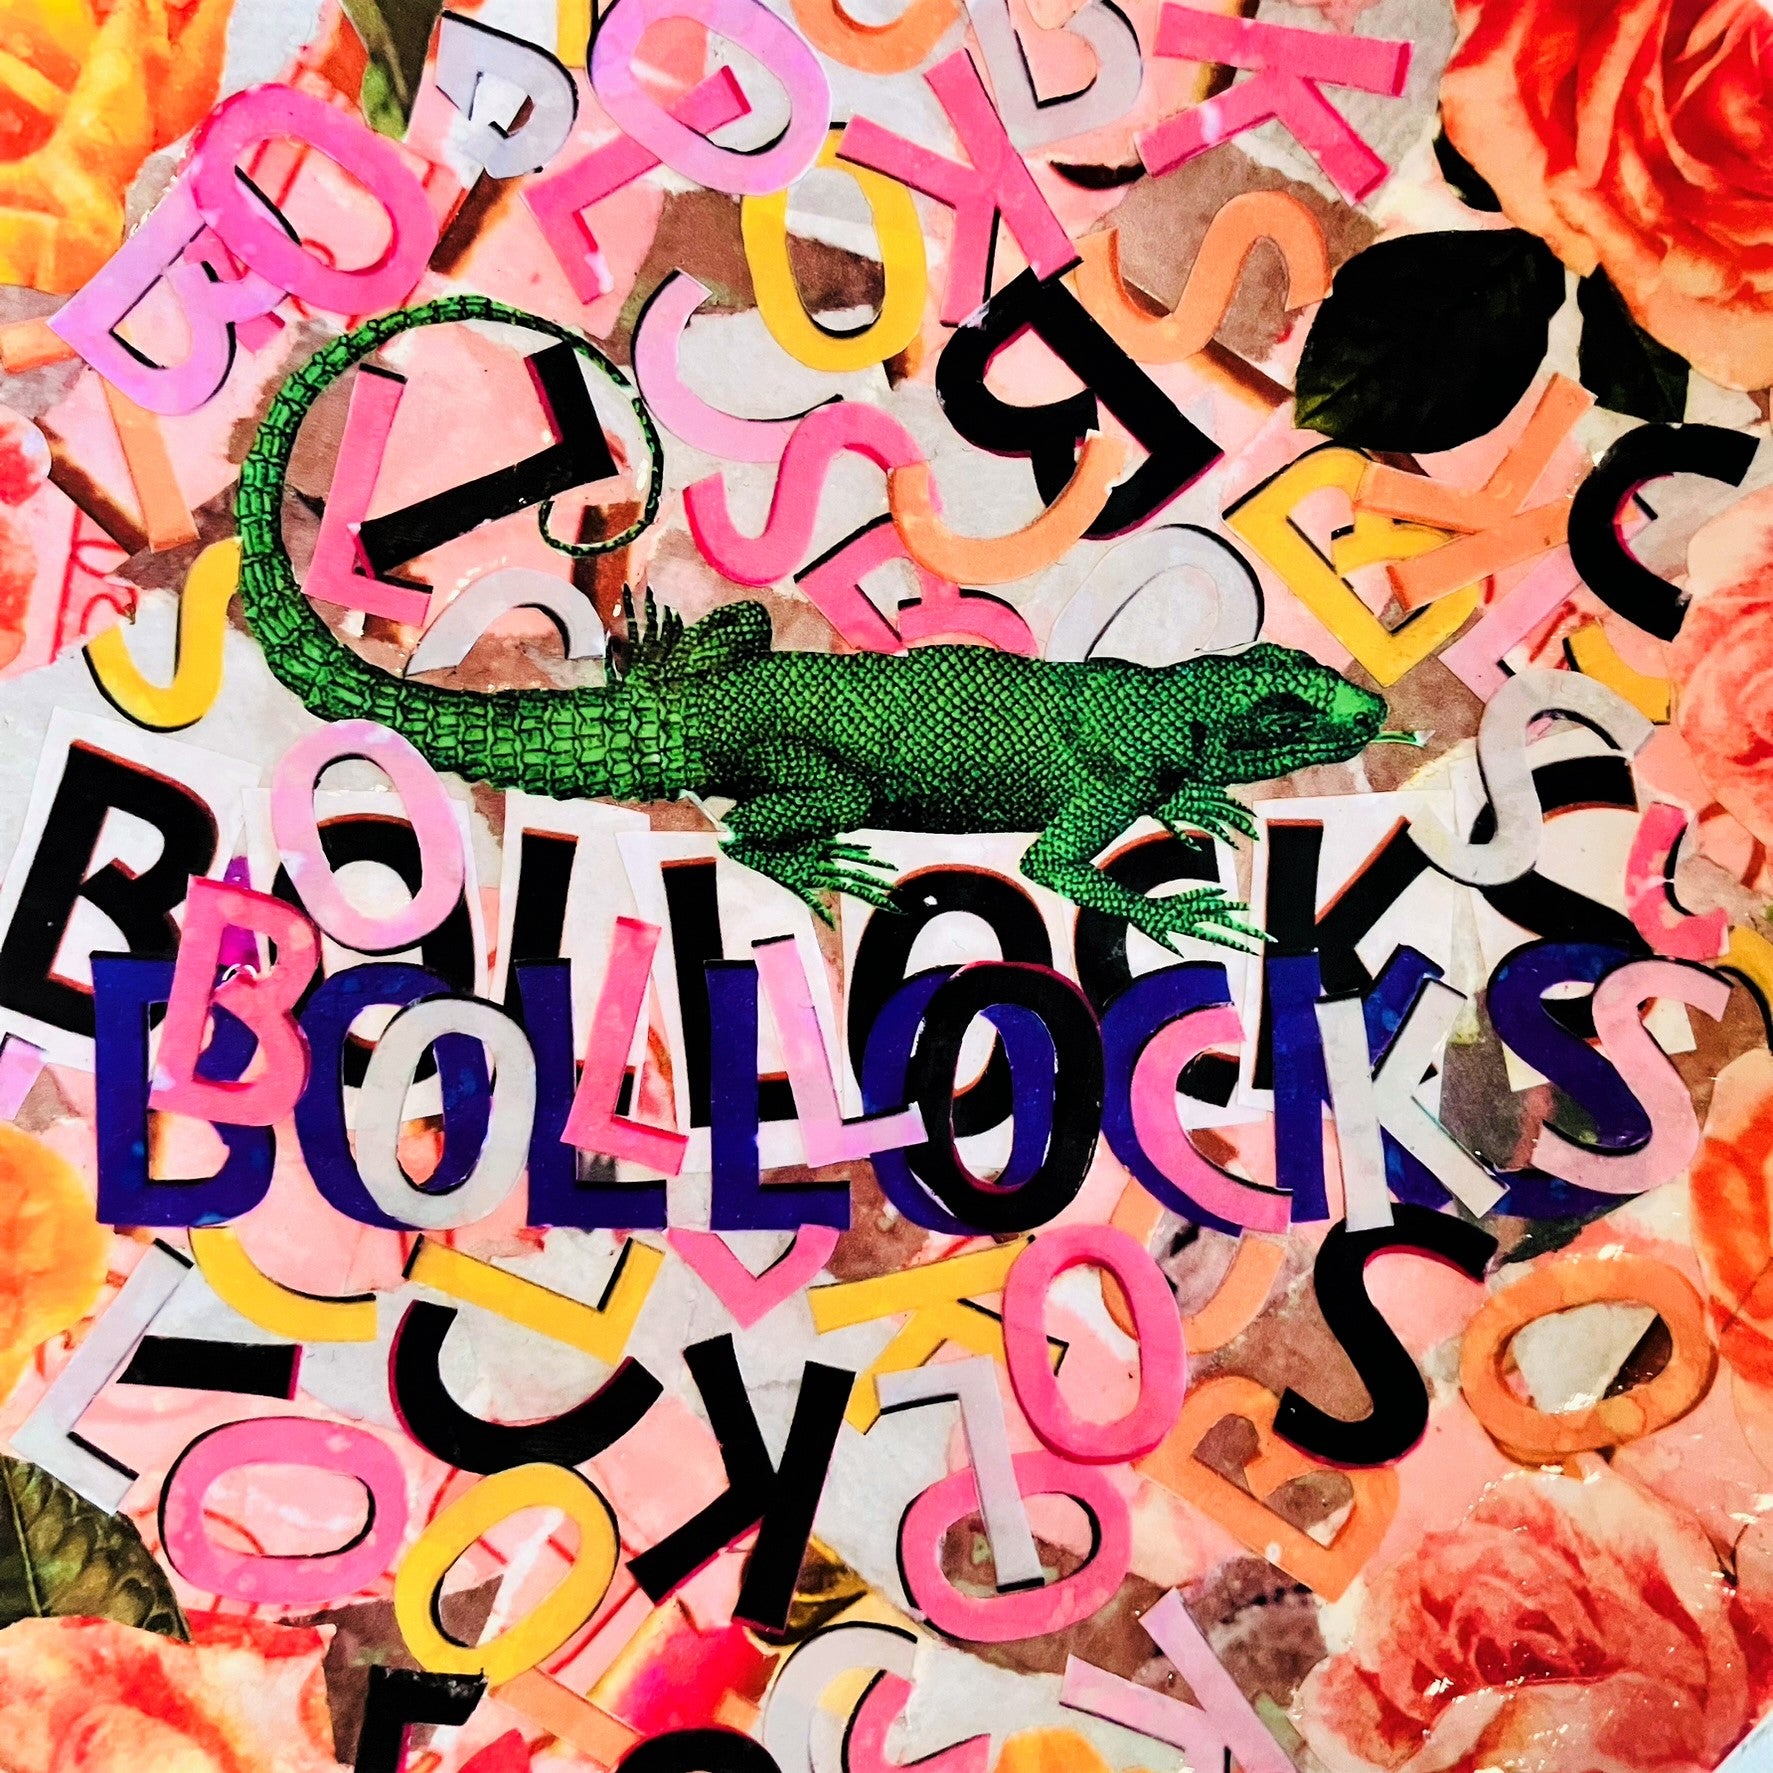 "Bollocks" Wall Plate by House of Frisson, featuring a collage of colourful letters forming the word "bollocks", and a lizard, framed by roses. Closeup detail showing the word "bollocks" and a lizard.